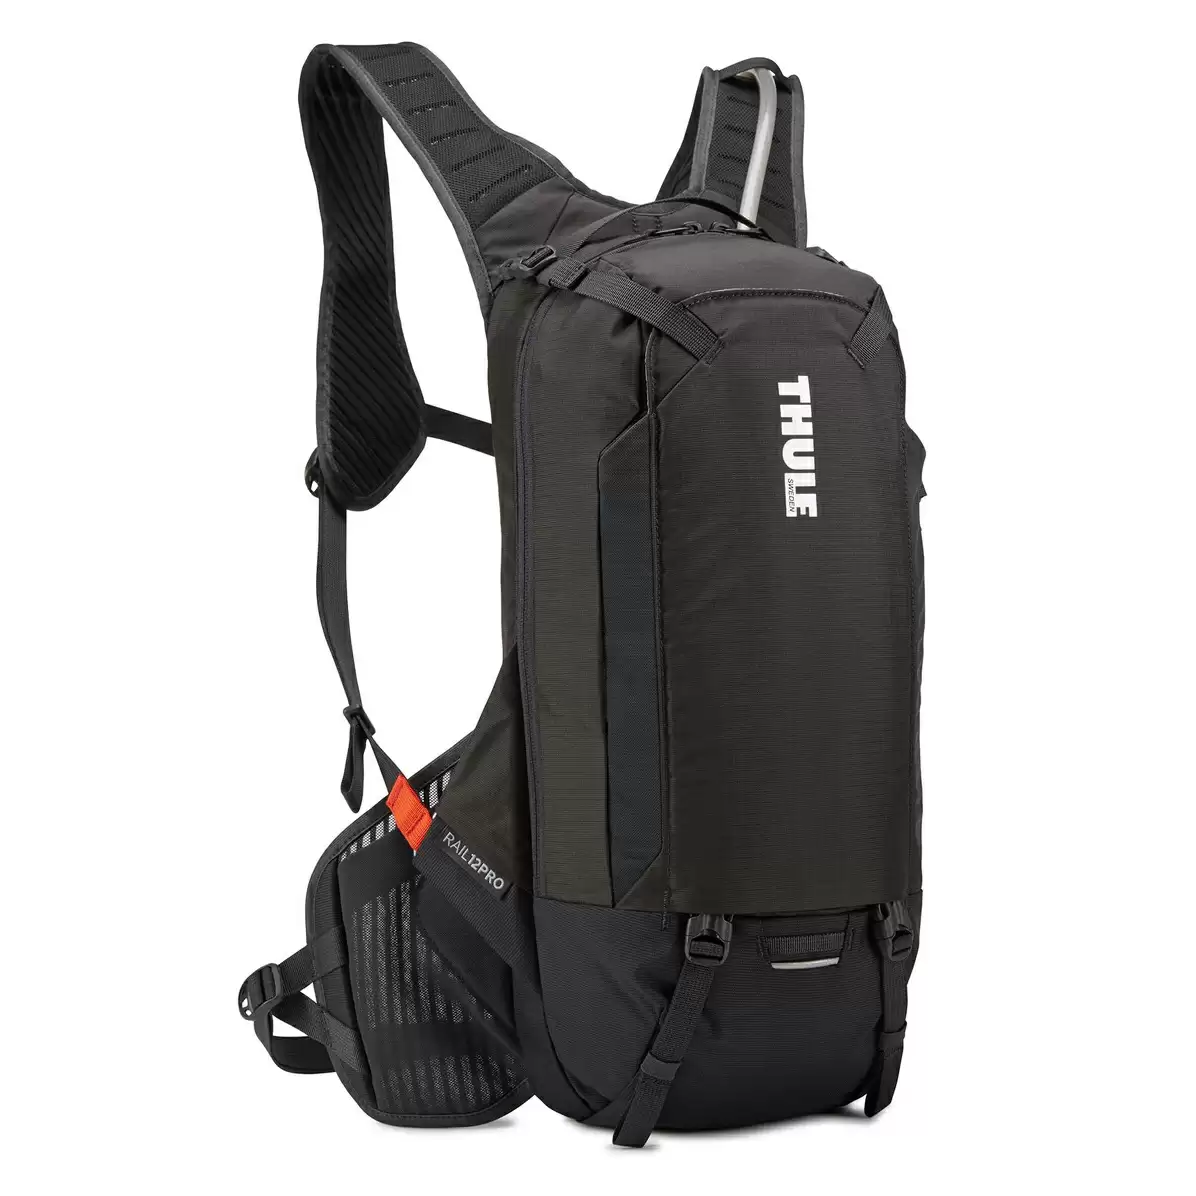 Water backpack 12lt PRO black with back protector - image